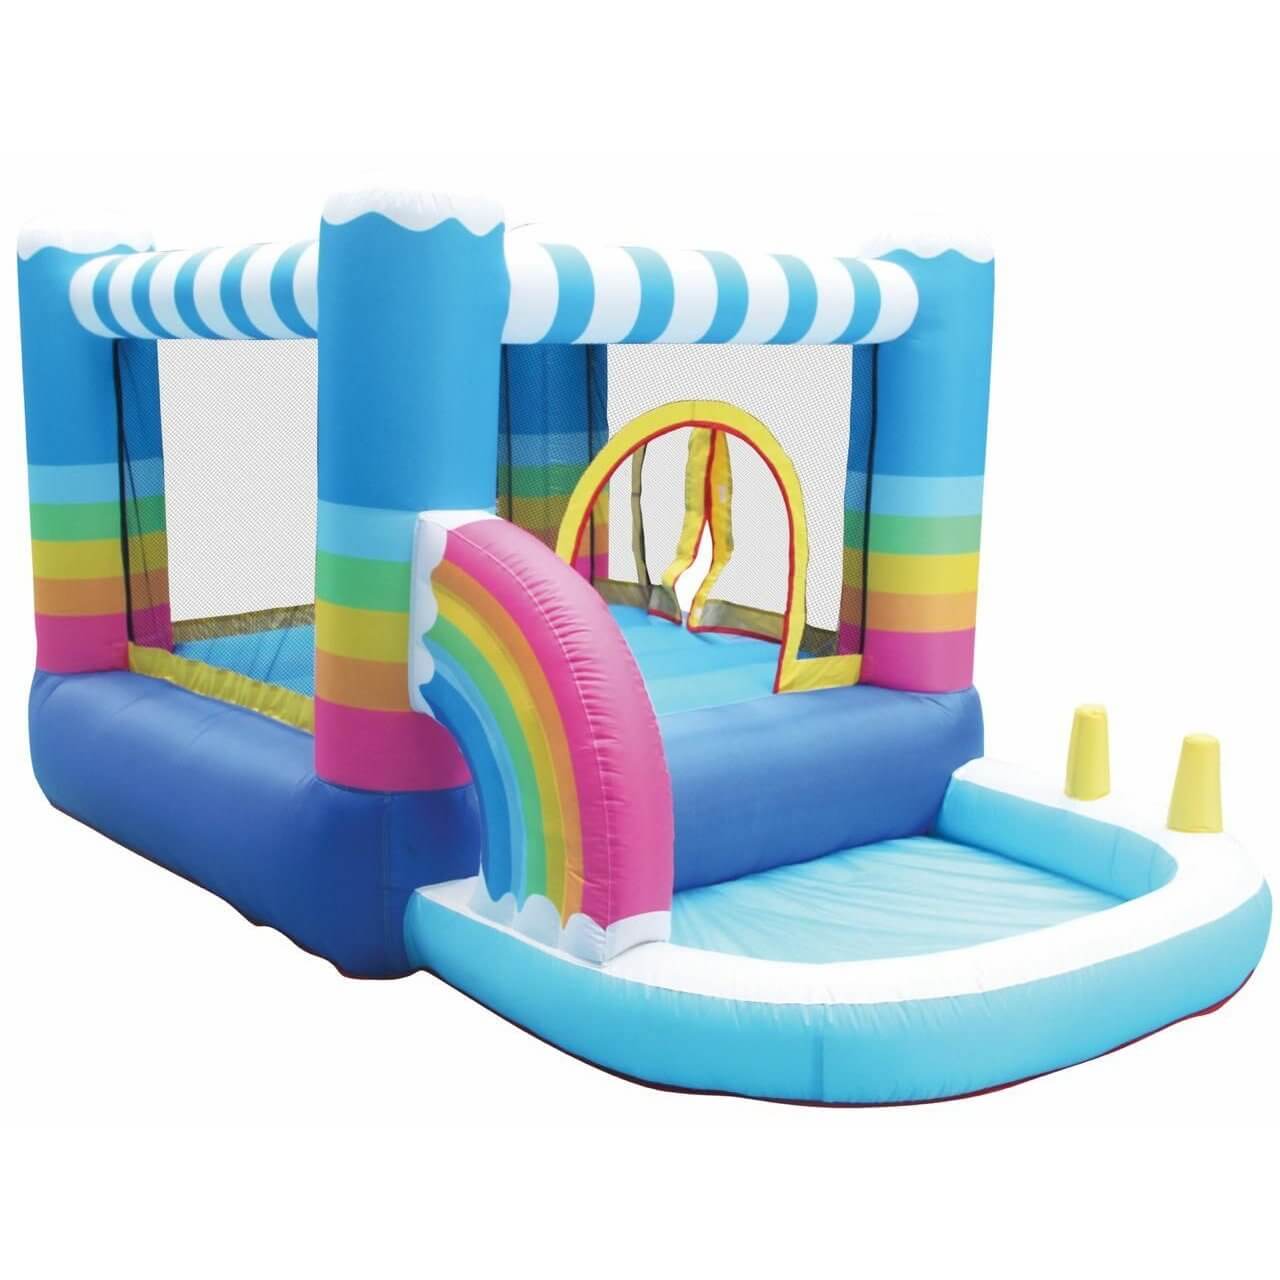 Megastar Inflatable Rainbow Bounce House with Built-In Ball Pit - - Multi Color - MGA STAR MARKETING